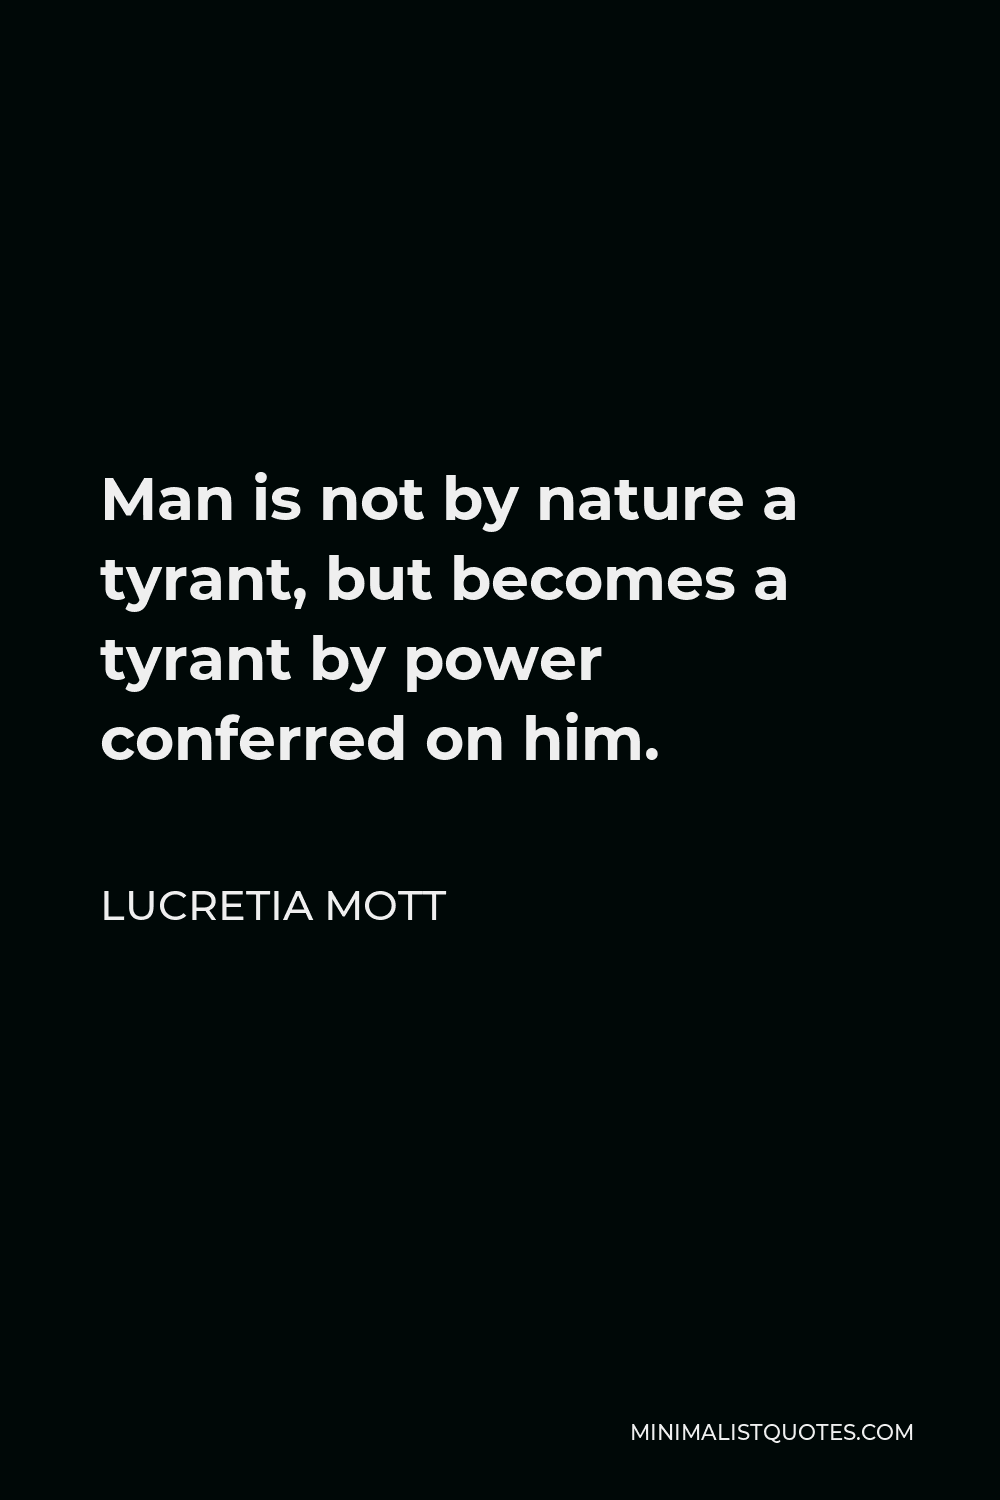 Lucretia Mott Quote - Man is not by nature a tyrant, but becomes a tyrant by power conferred on him.